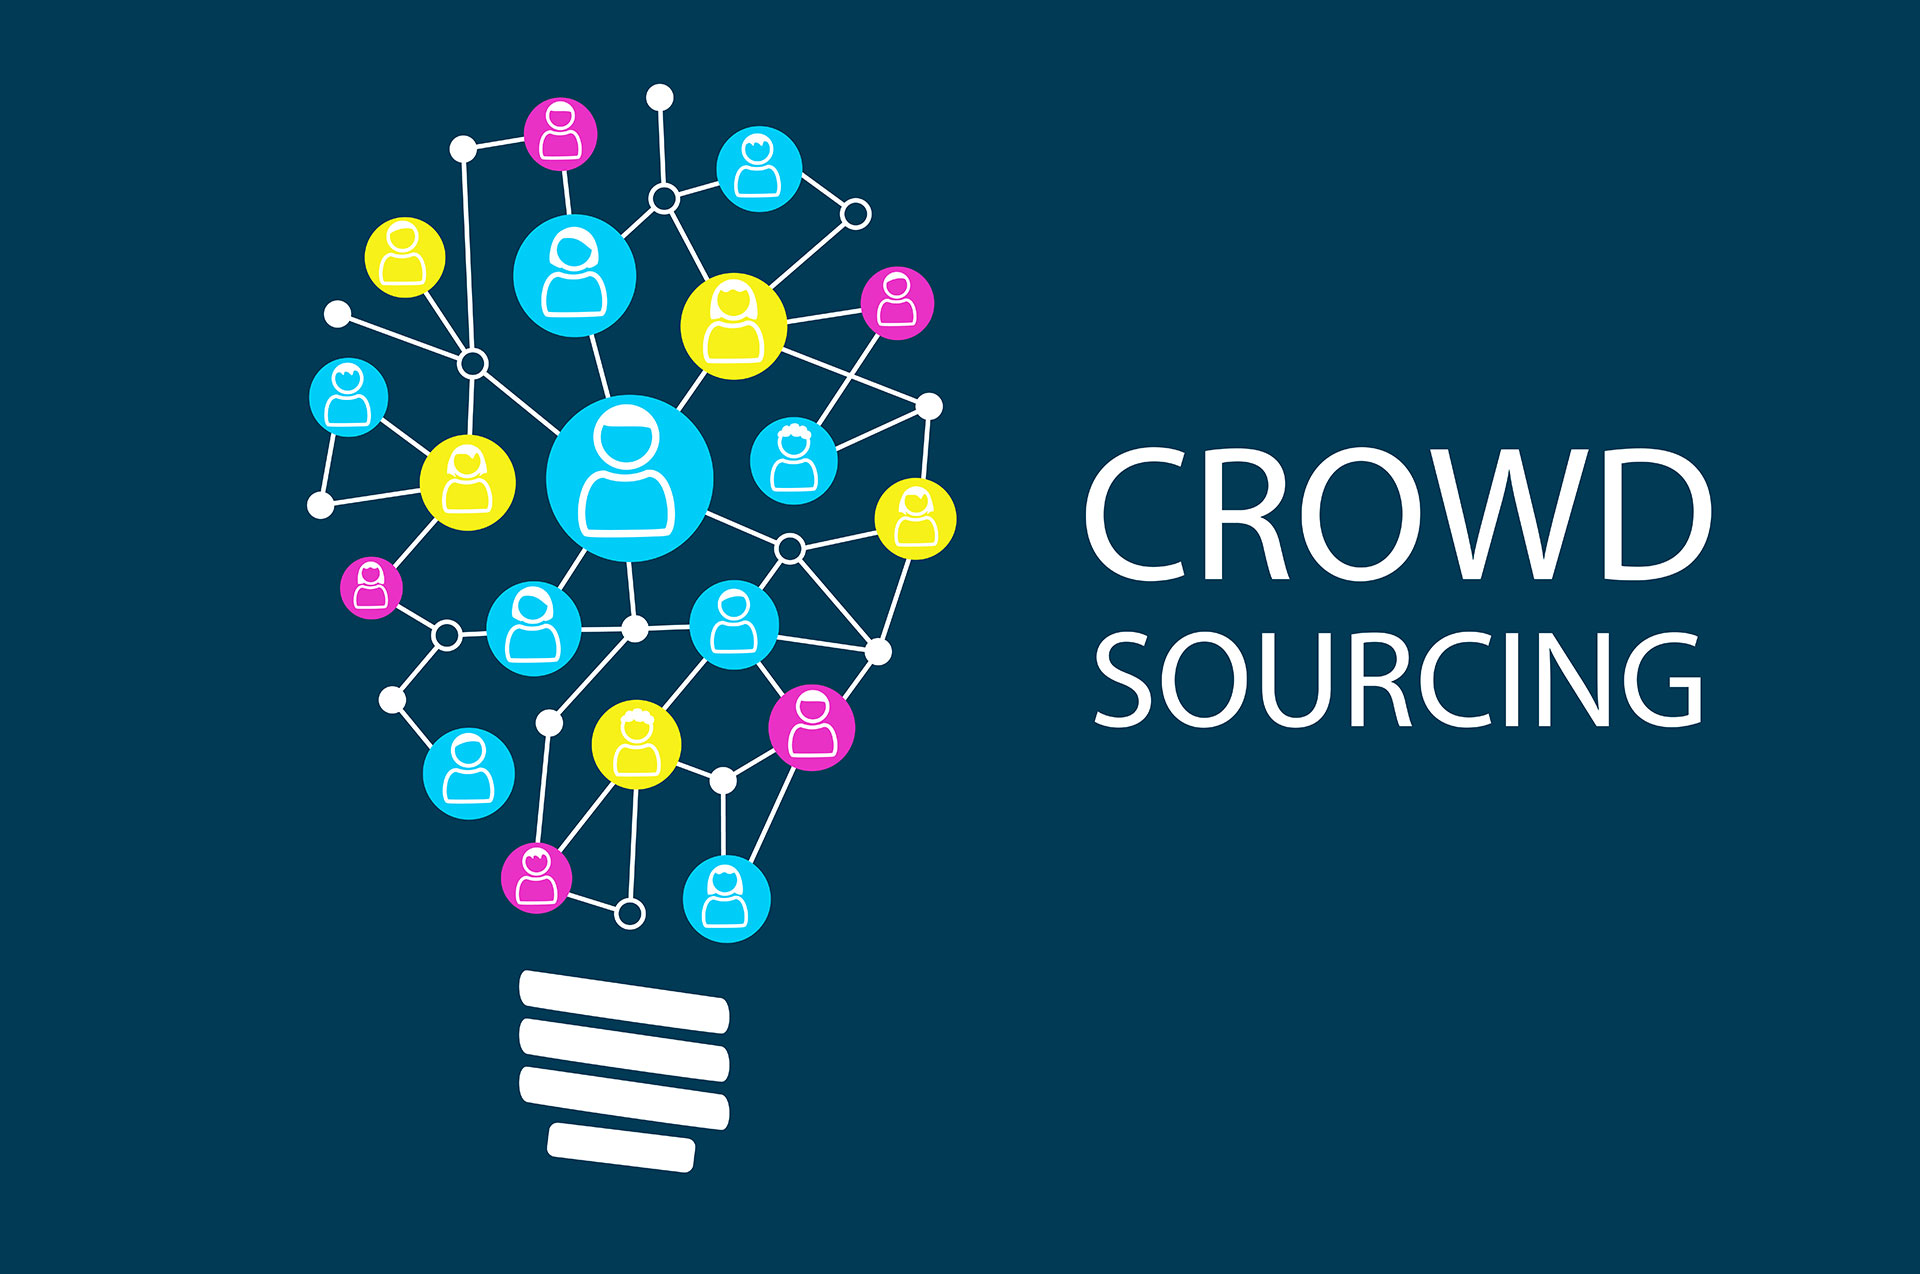 From Crowdfunding to Crowdsourcing: What Are the 3 Differences? | Crowdsourcing